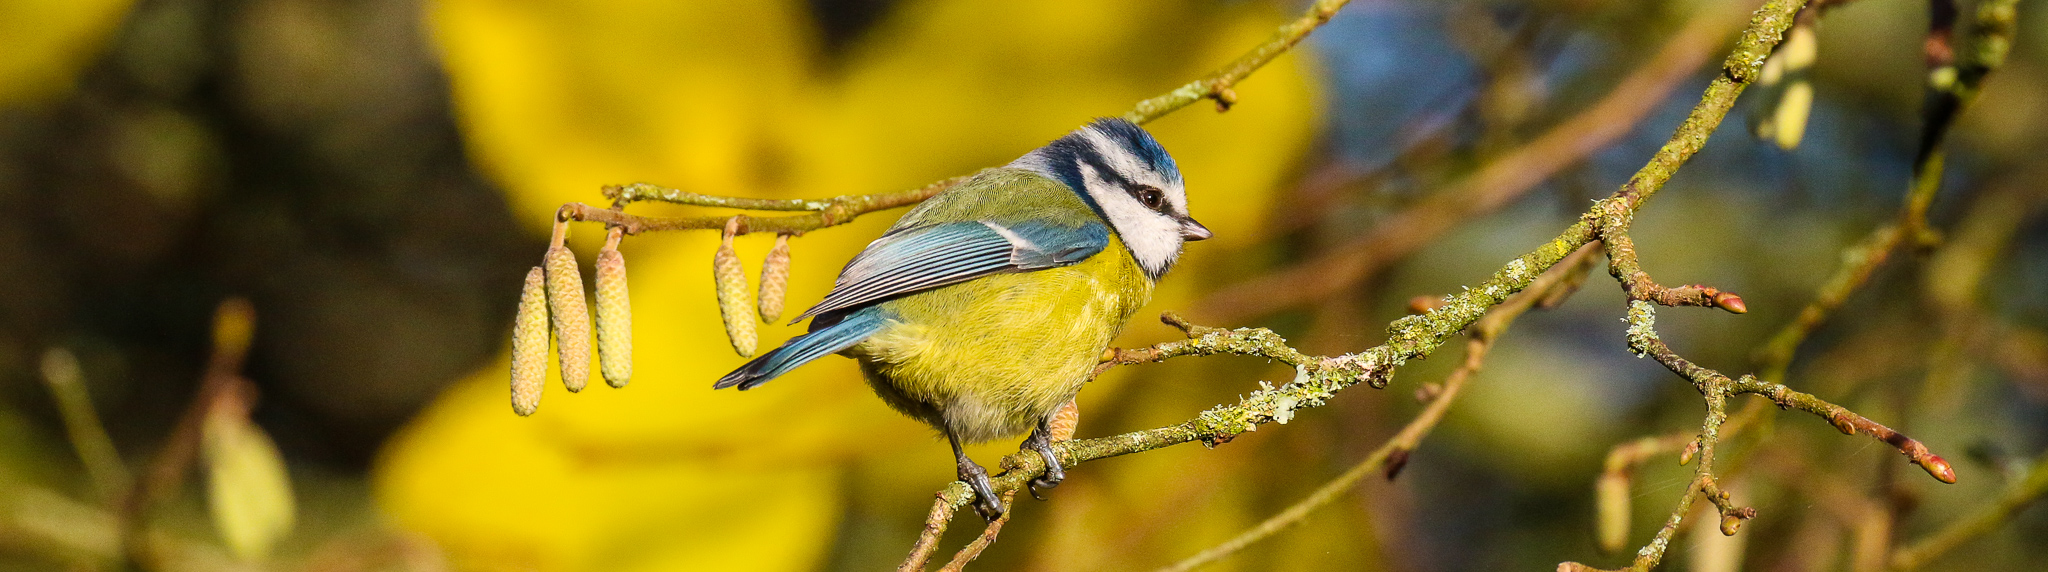 A Blue Tit on a tree at the East Coast Nature Reserve, County Wicklow, Ireland